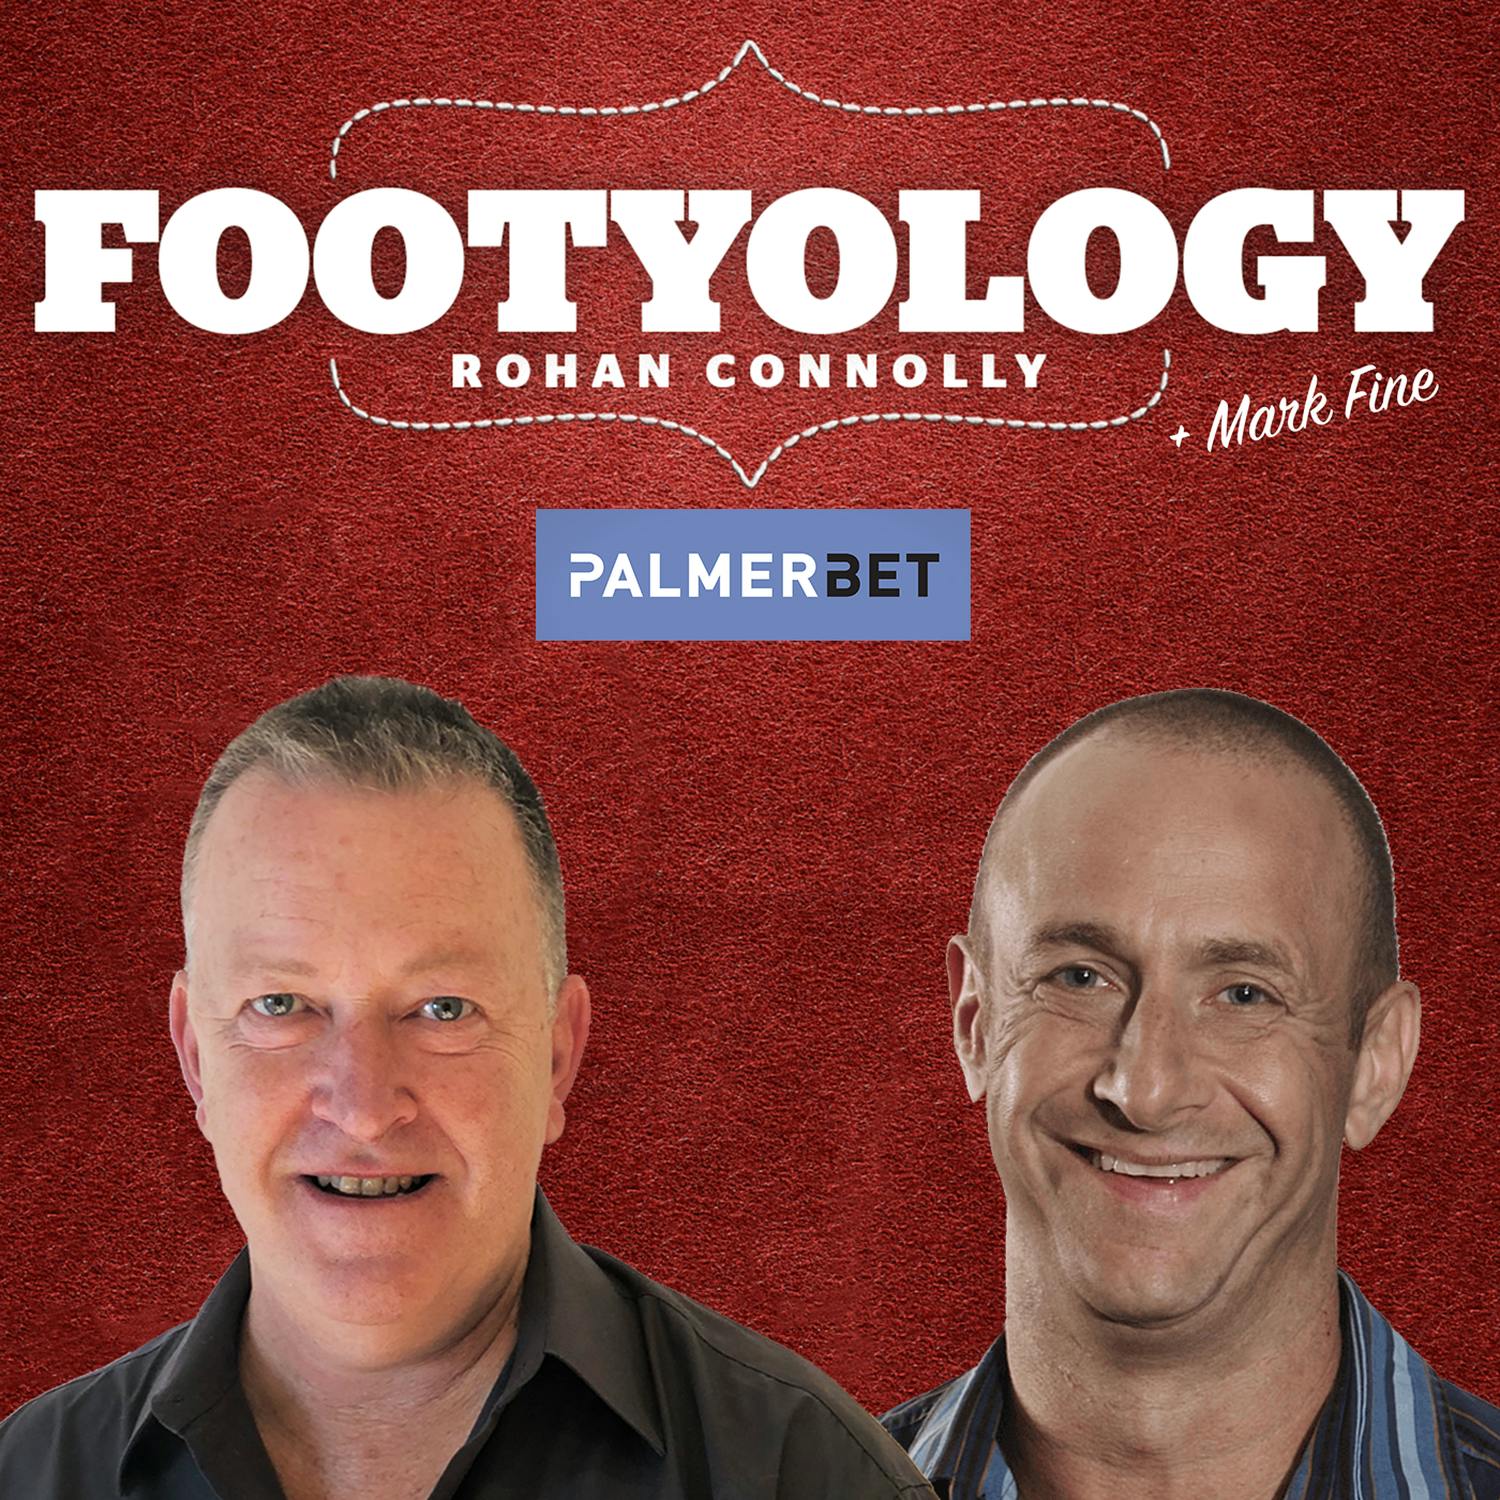 Footyology Podcast - February 15th 2022